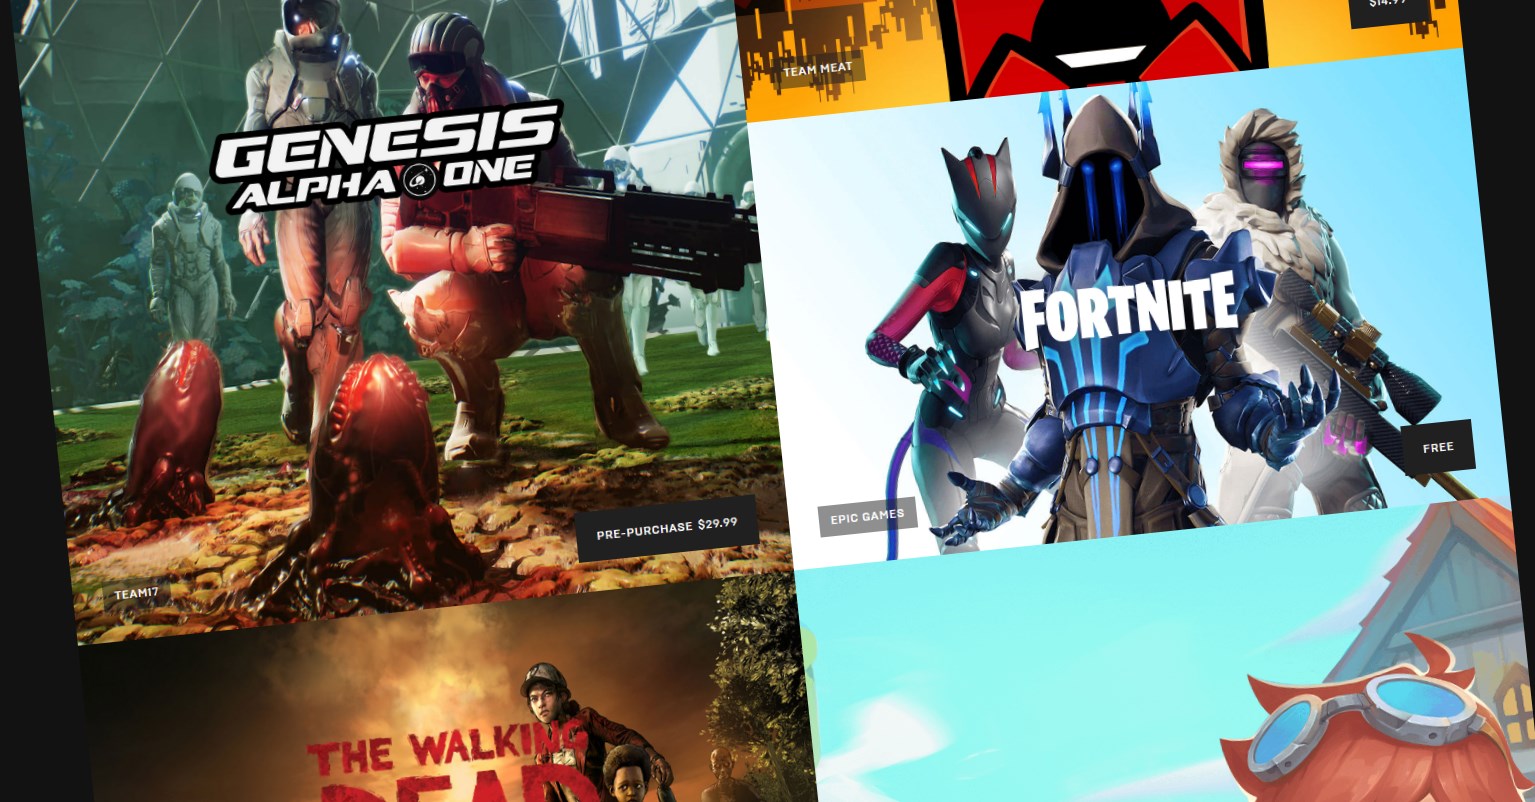 October Feature Update - Epic Games Store